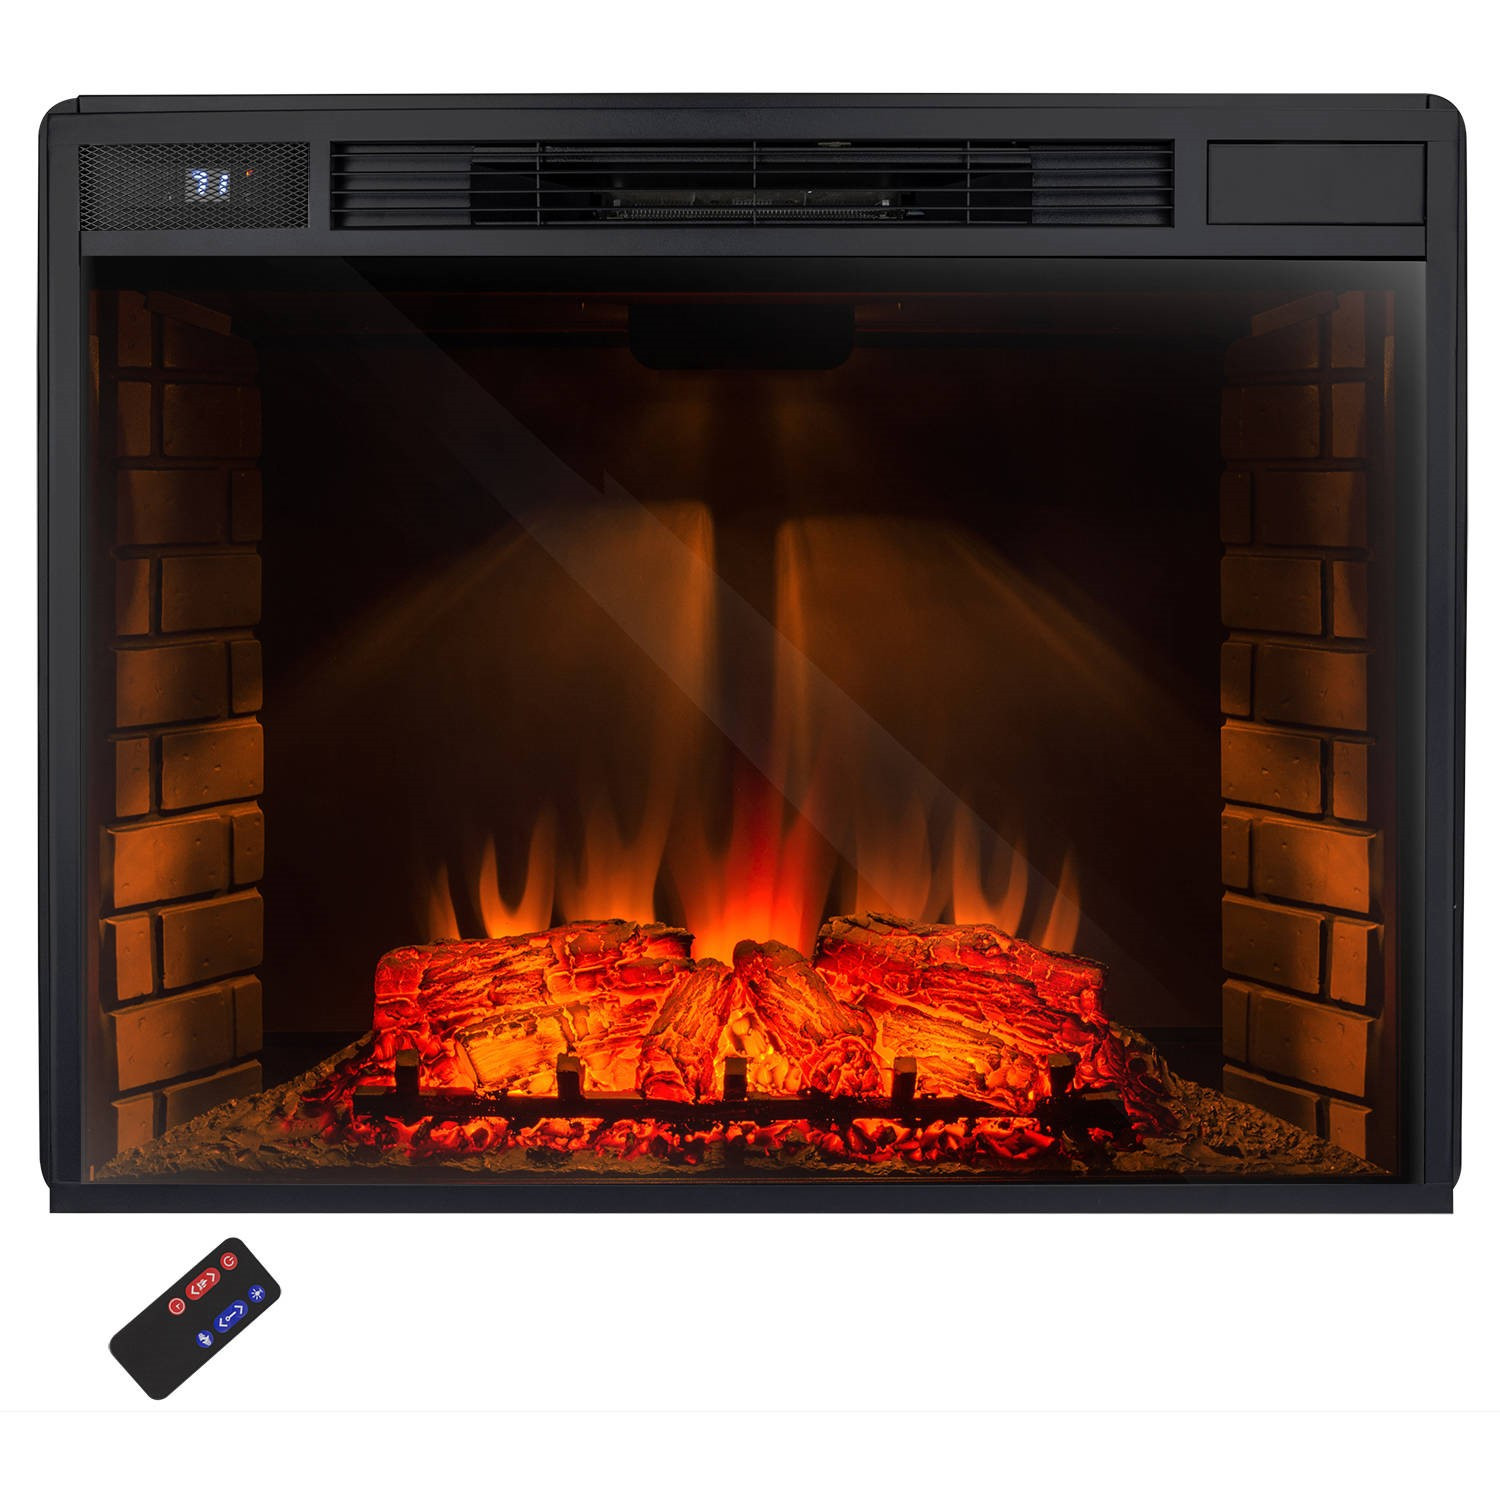 Home Depot Electric Fireplace Insert
 AKDY FP0017 33" 1500W Freestanding Electric Fireplace